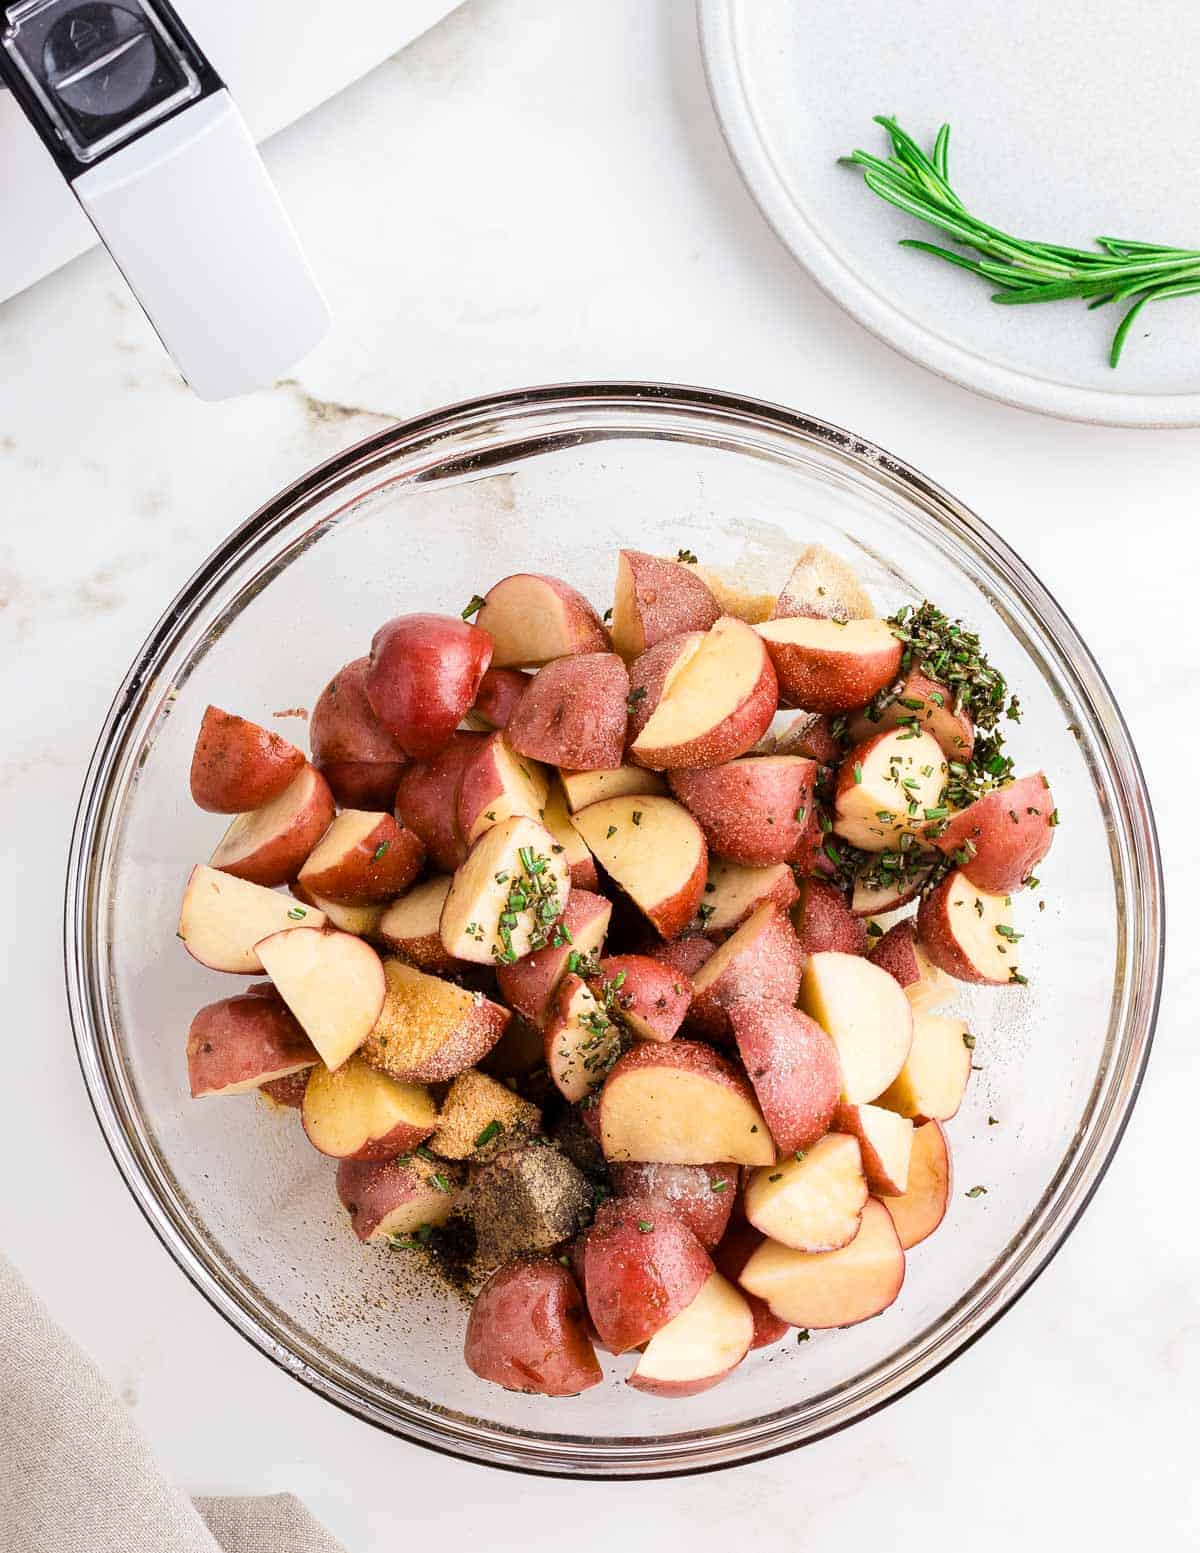 Red potatoes cut into chunks with fresh minced rosemary and spices in a glass bowl.